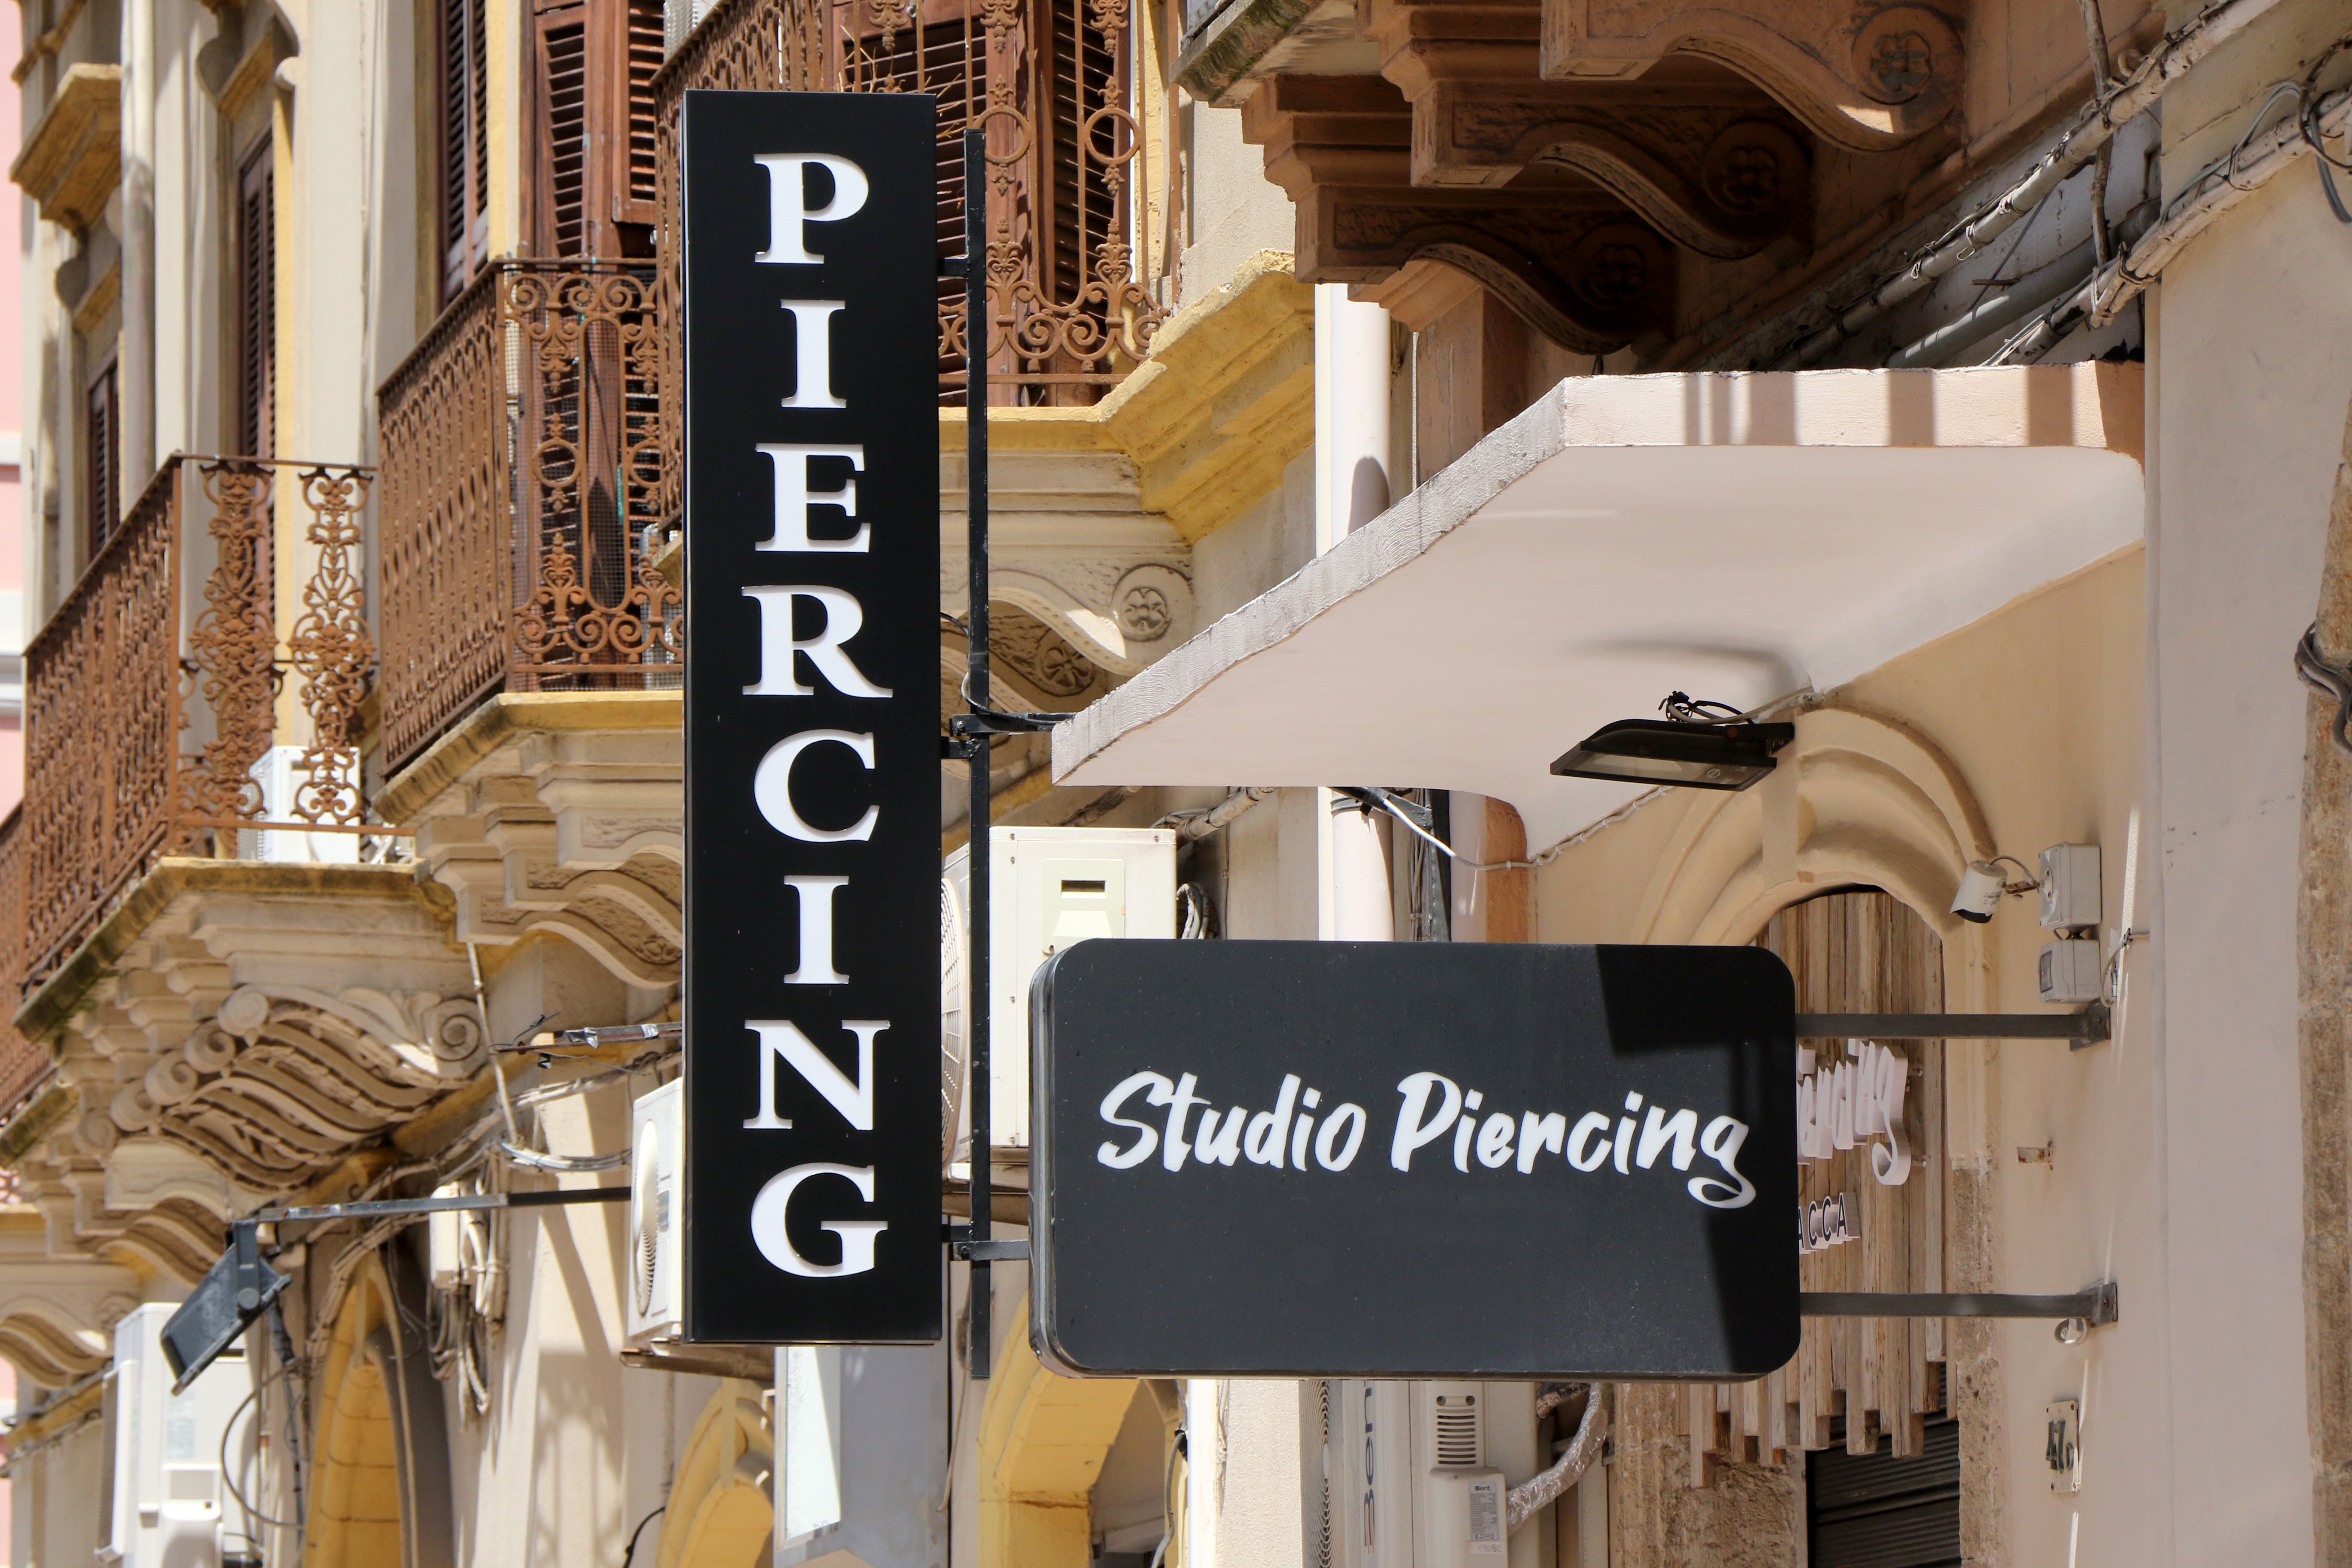 A photo of a sign that reads "Piercing" | Source: Shutterstock